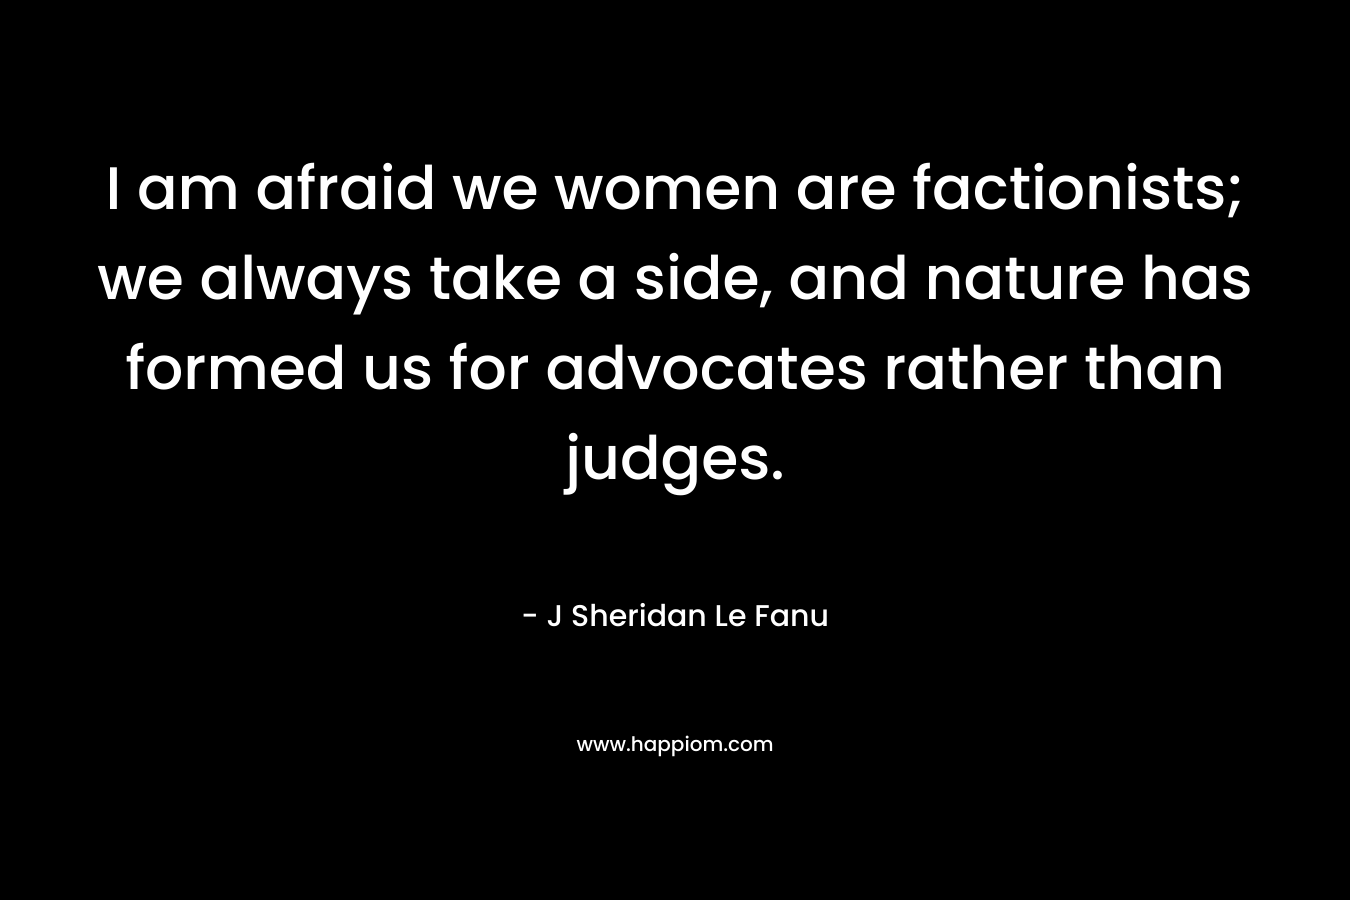 I am afraid we women are factionists; we always take a side, and nature has formed us for advocates rather than judges.